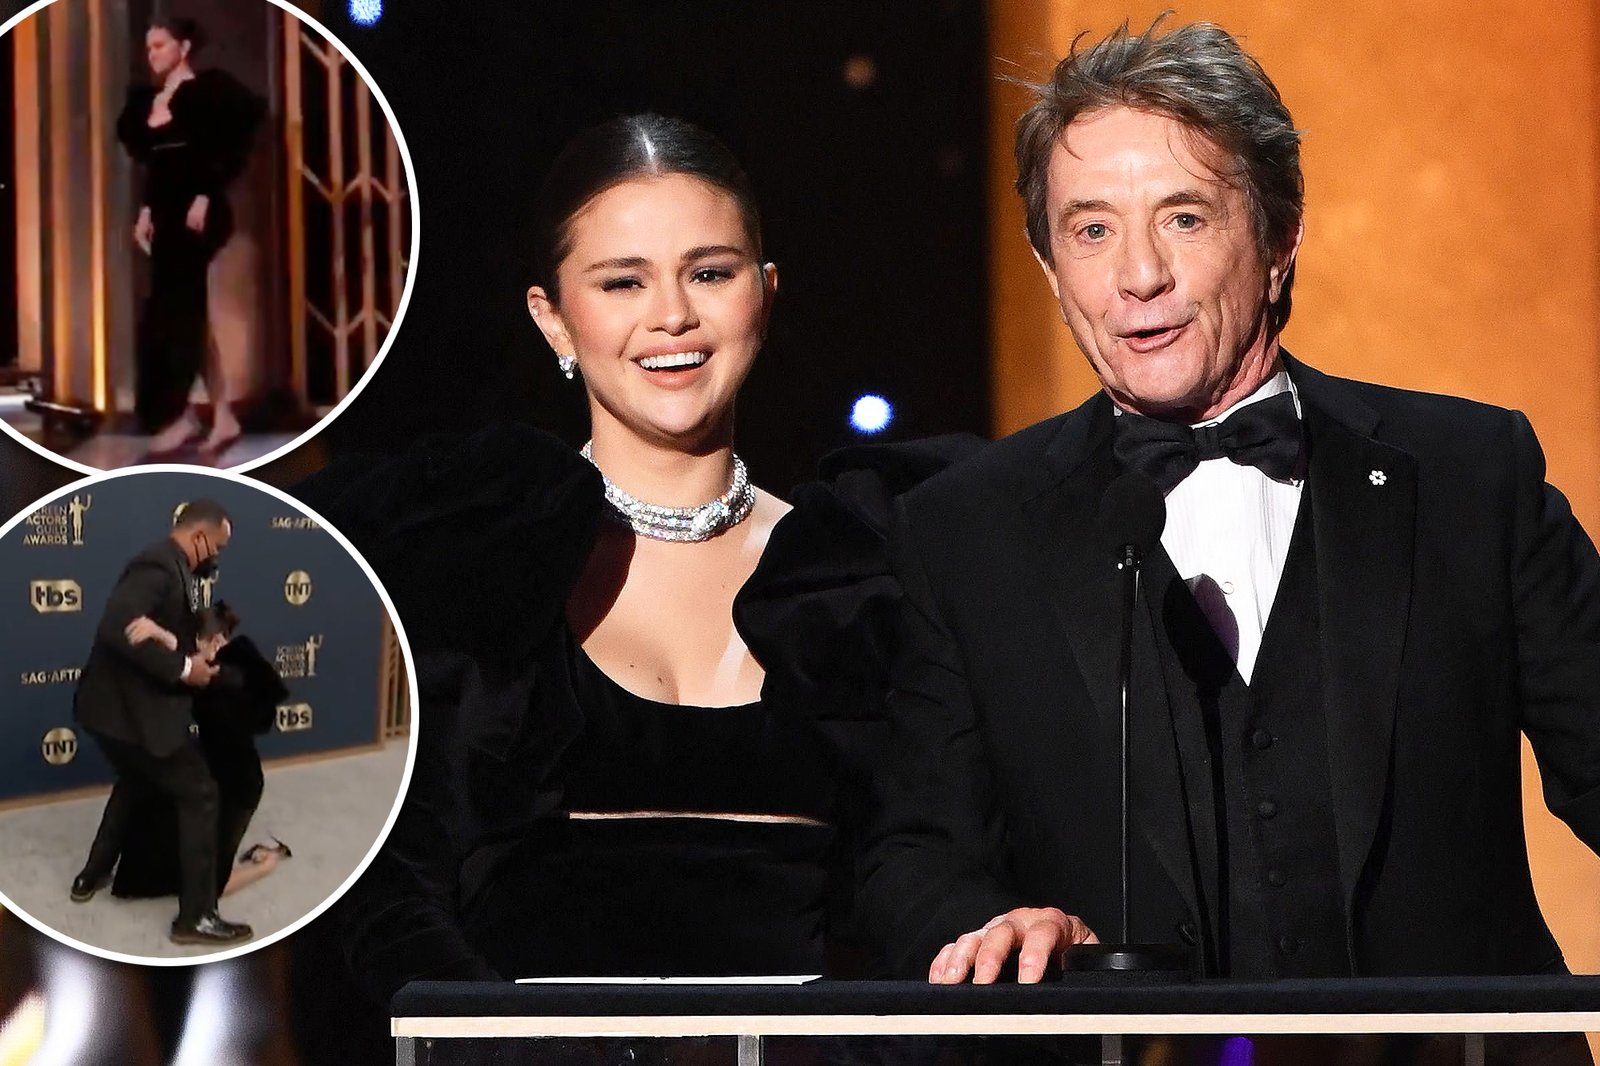 After tripping on the red carpet, Selena Gomez discarded her shoes while presenting an award alongside Martin Short at the 2022 SAG Awards.